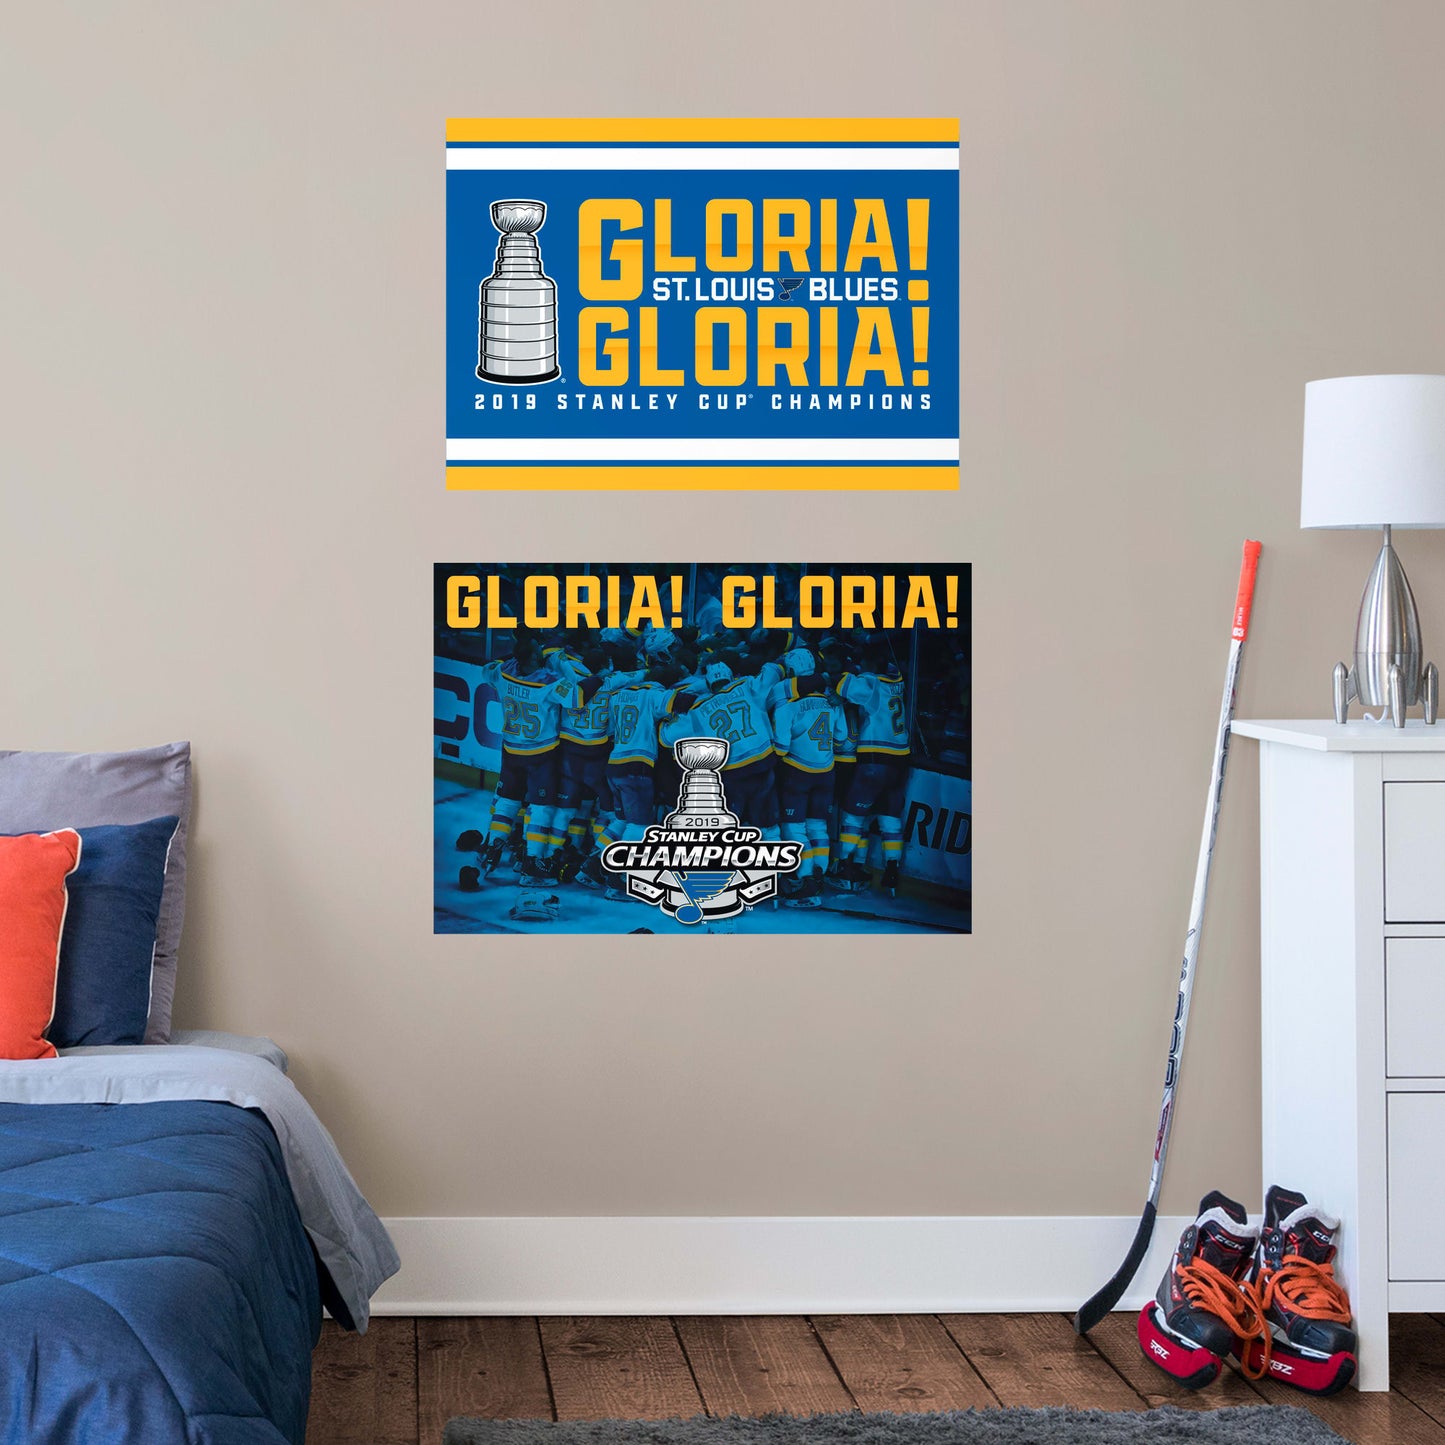 St. Louis Blues: 'Gloria!' 2019 Stanley Cup Champions Collection - Officially Licensed NHL Removable Wall Decal